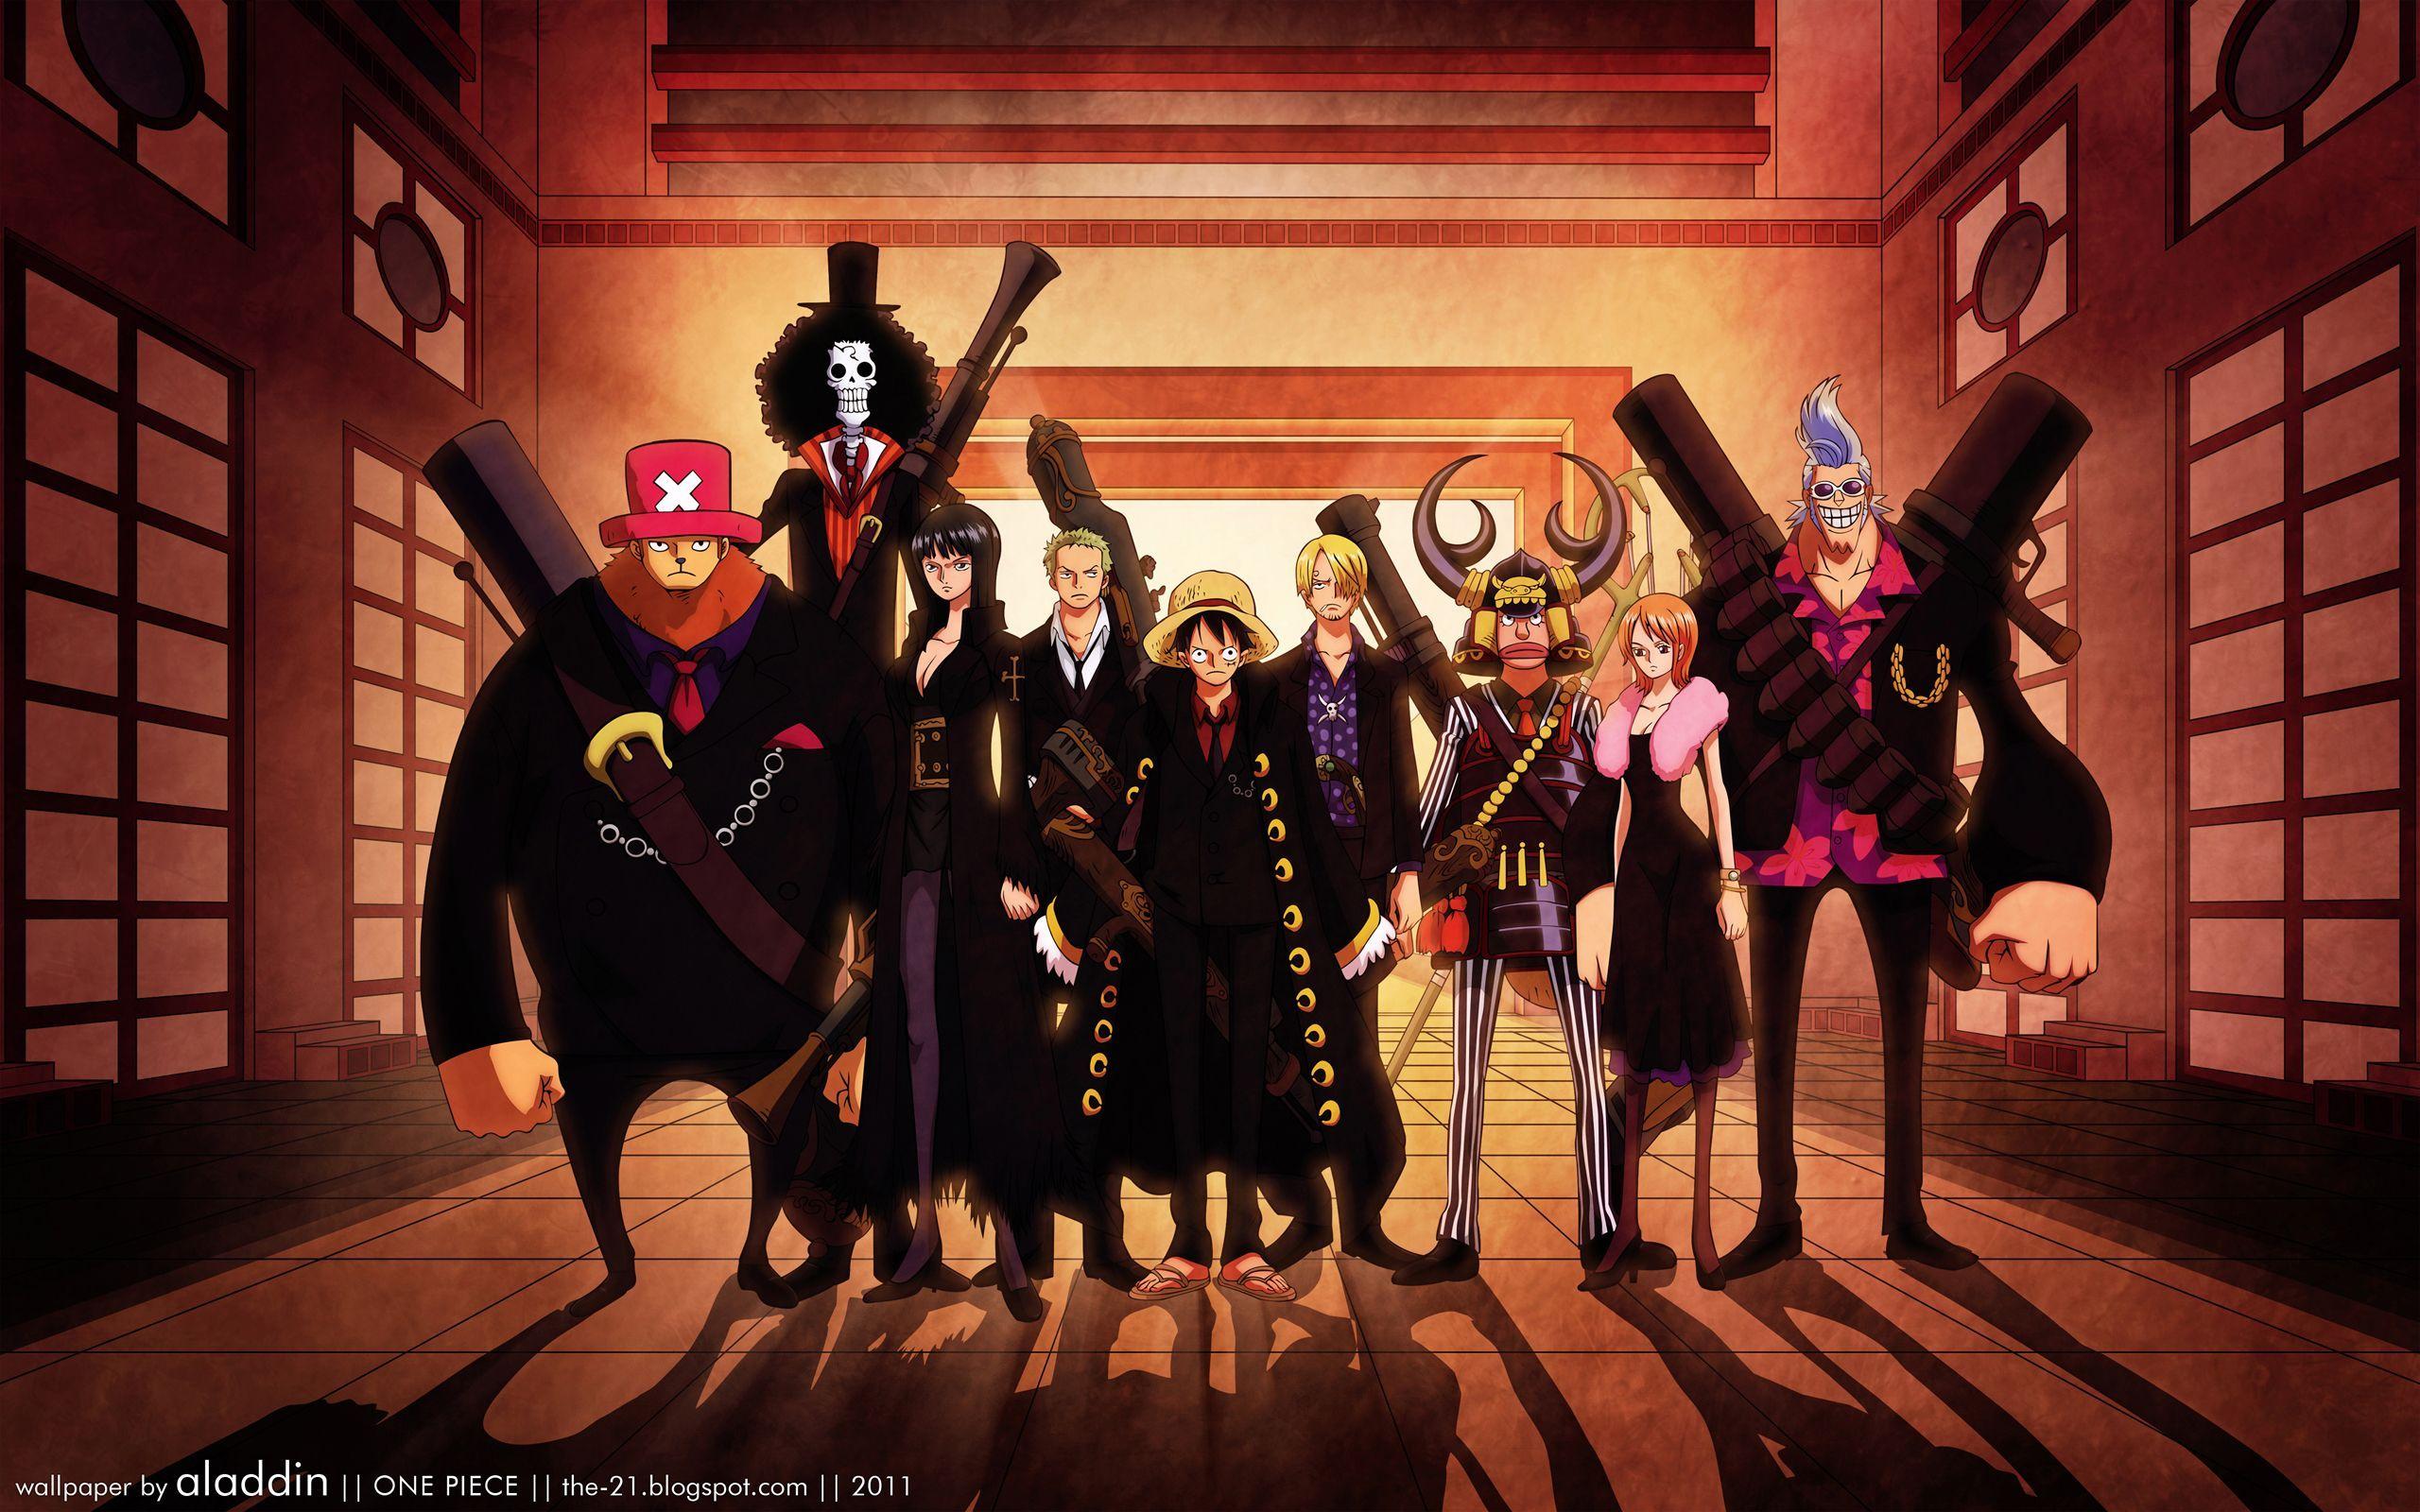 HD wallpaper One Piece Strong World Anime. One Piece